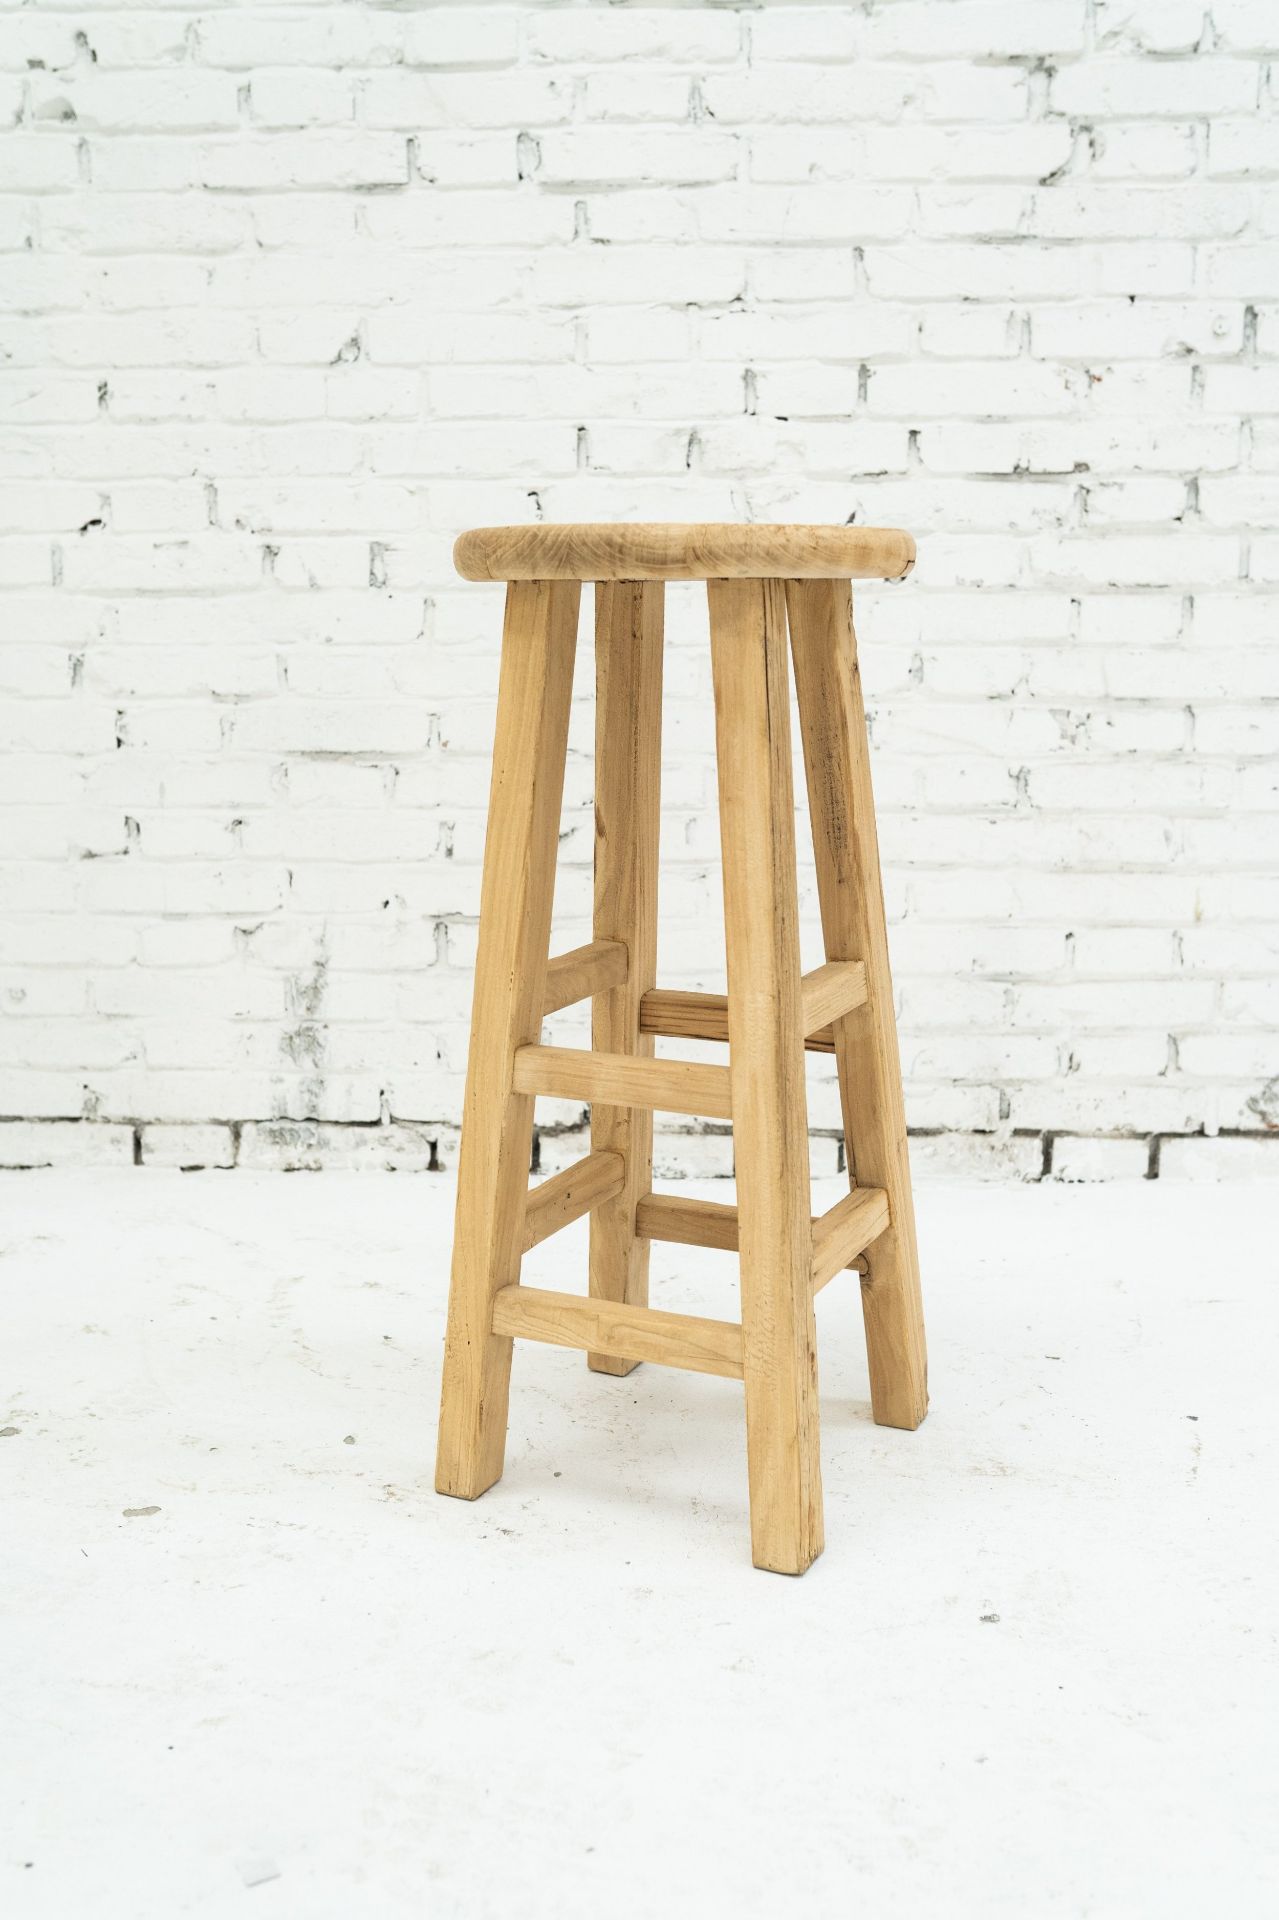 2 x Tall Elm Stool: Stunning wooden bar stools from the Heibei provence of China. - Image 2 of 5